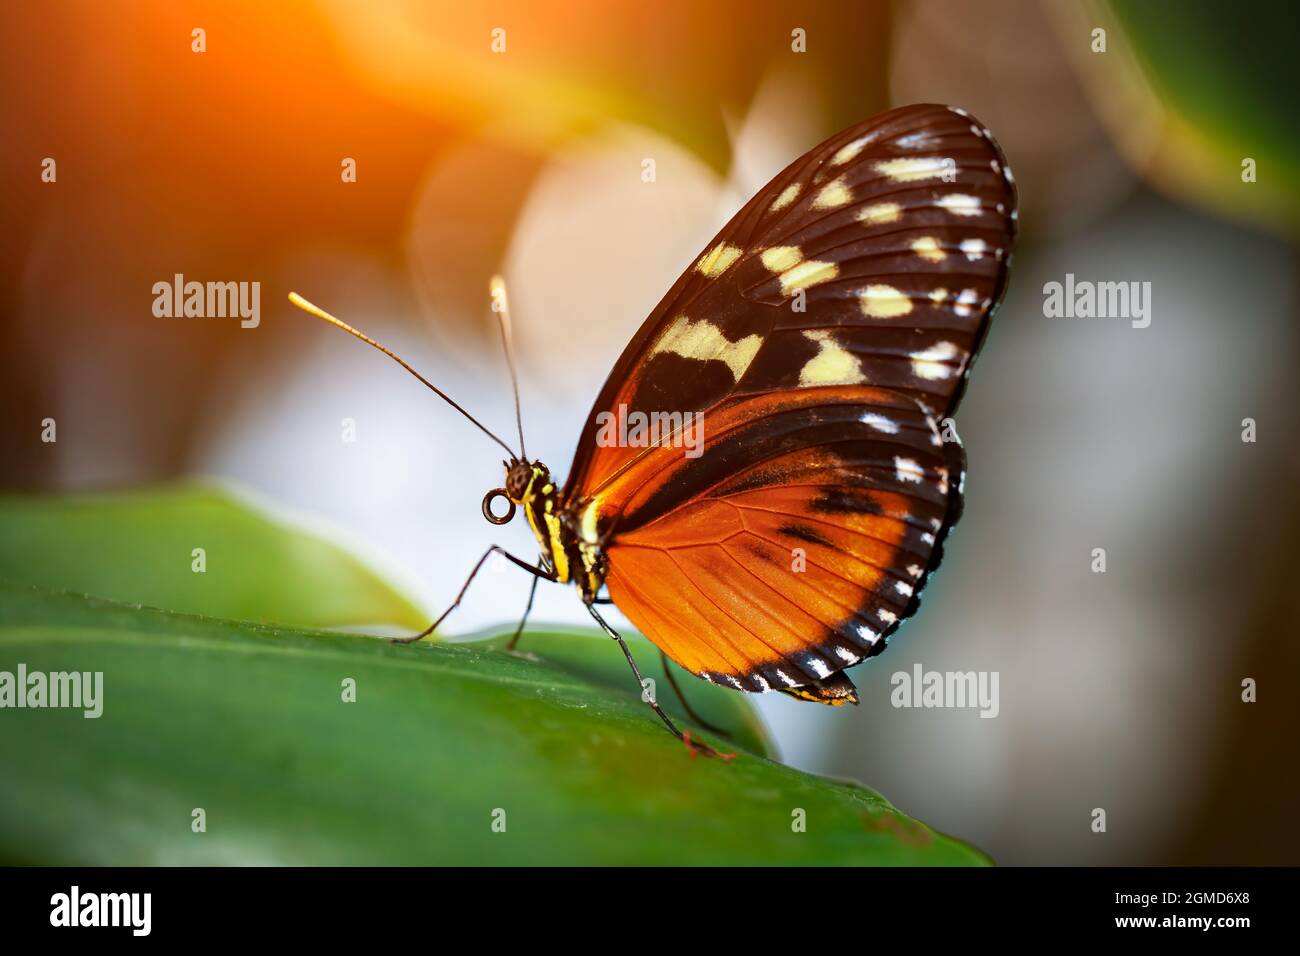 Beautif colorful tropical butterfly called Heliconius hecale  |  Tiger longwing  |  Golden longwing standing on green leaves in Konya tropical butterf Stock Photo